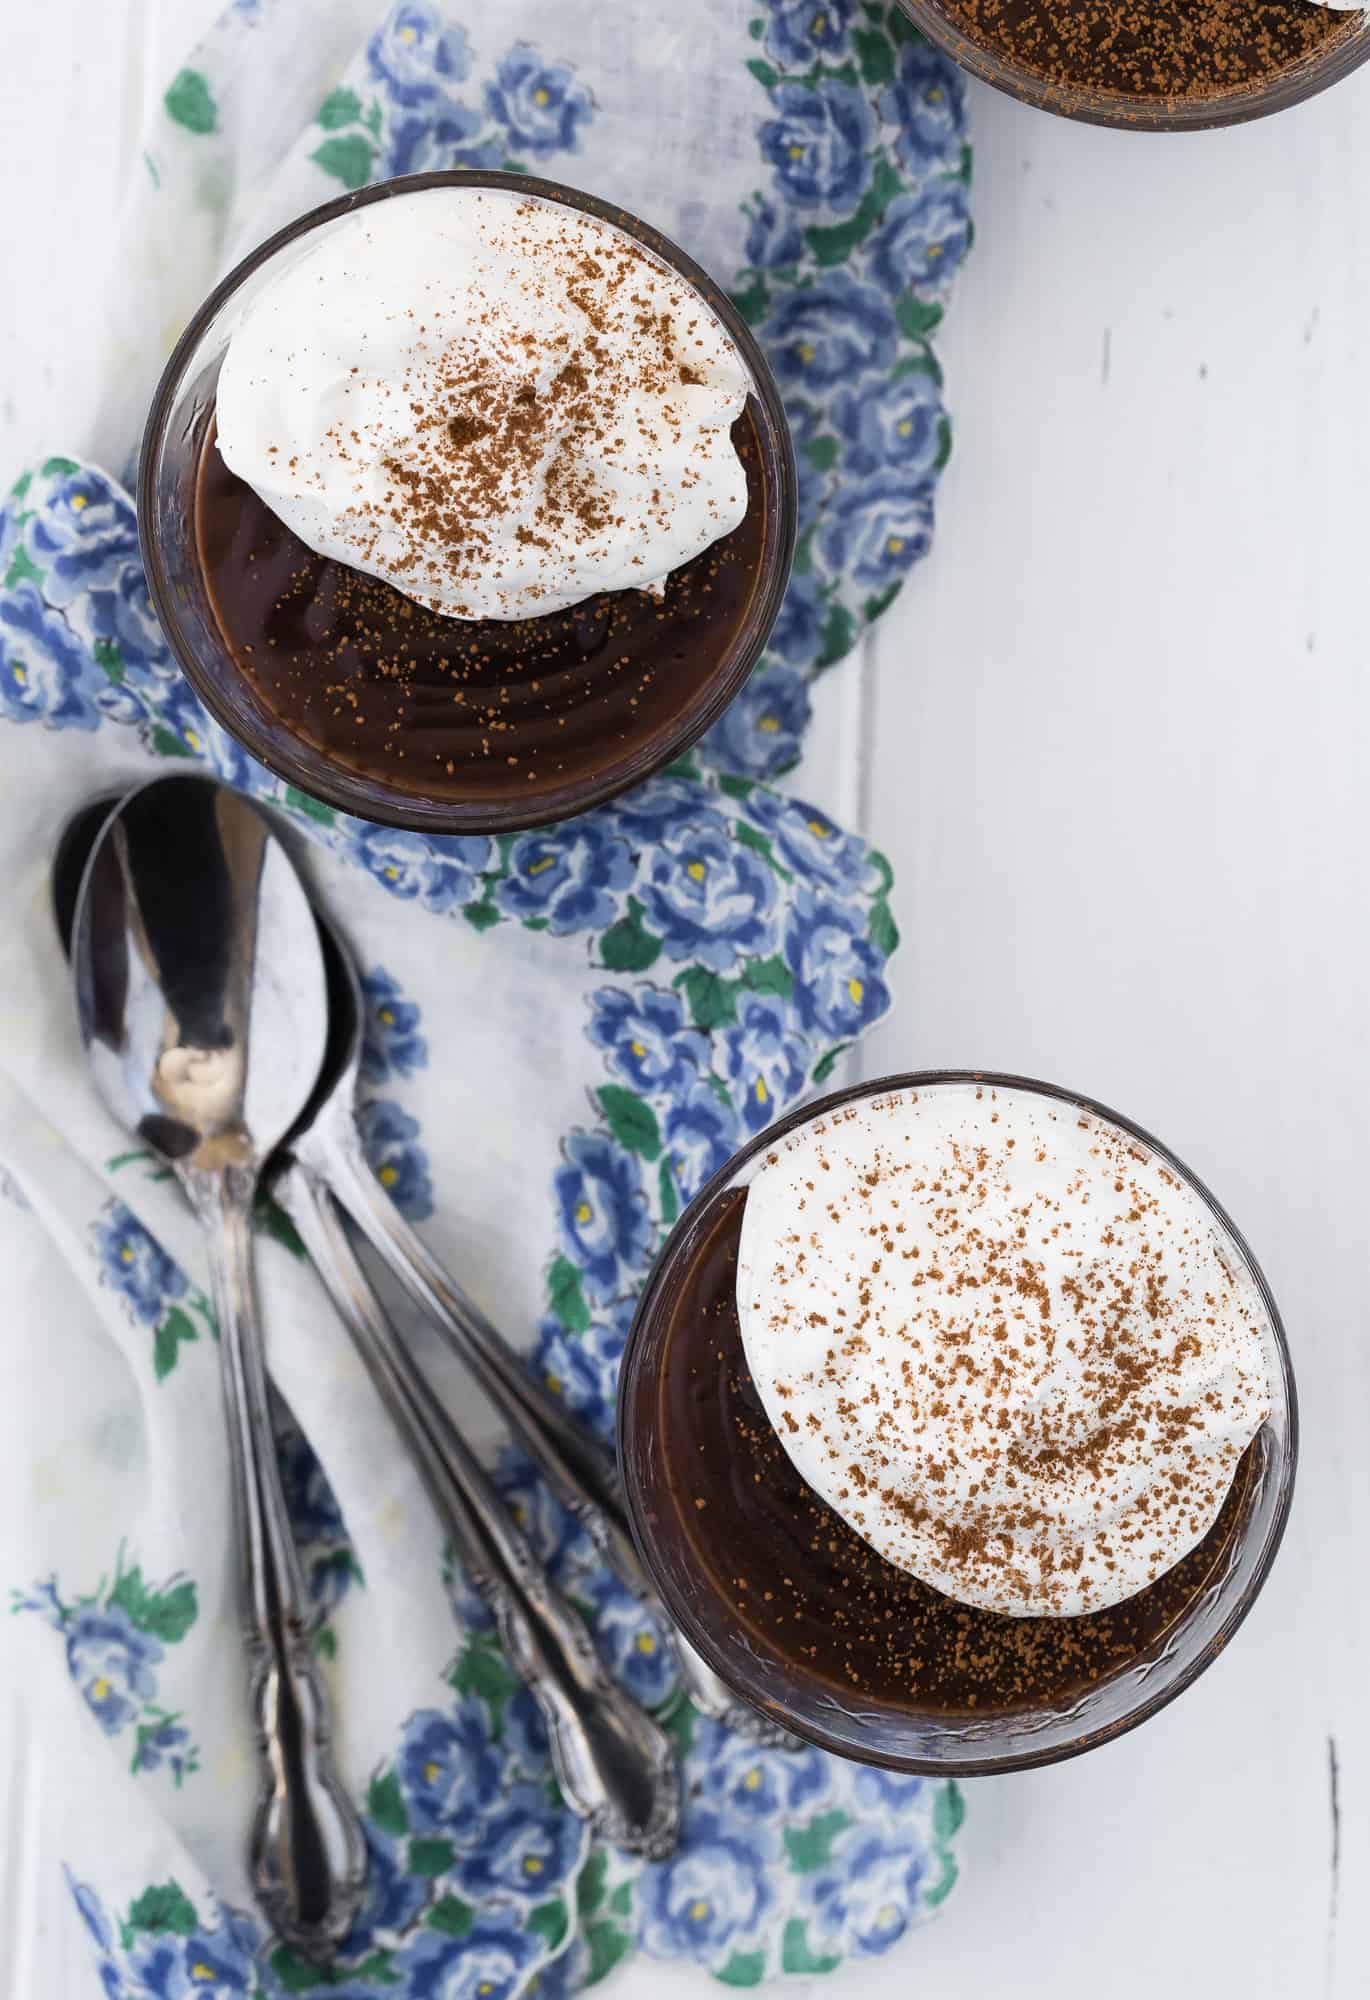 Pudding with cocoa powder and whipped cream.